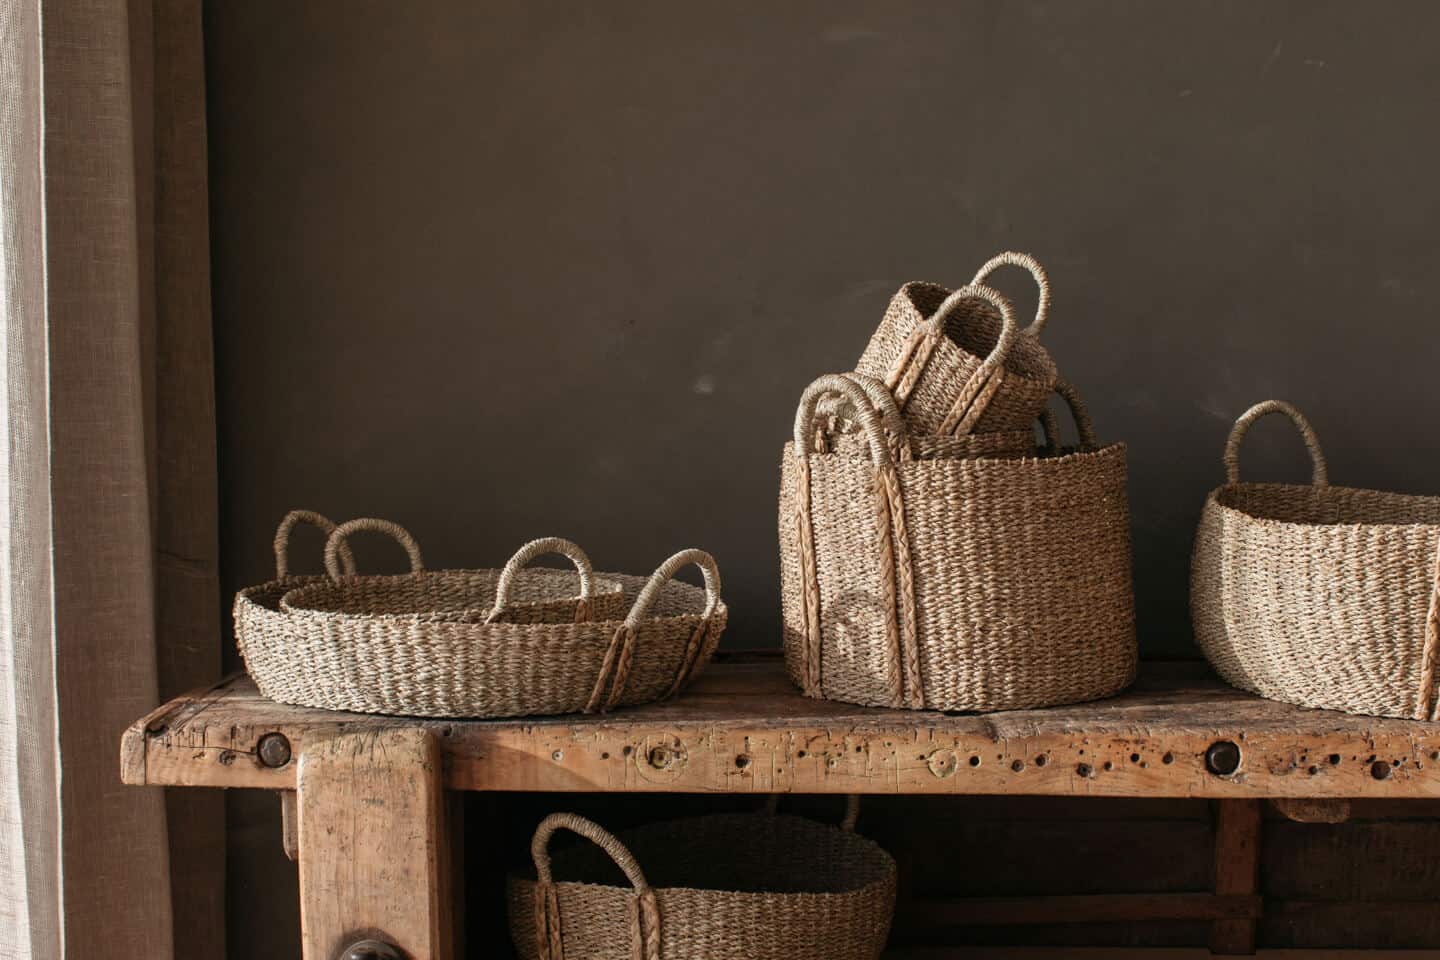 Seagrass baskets sit atop a weathered wooden bench demonstrating the elements of a biophilic home